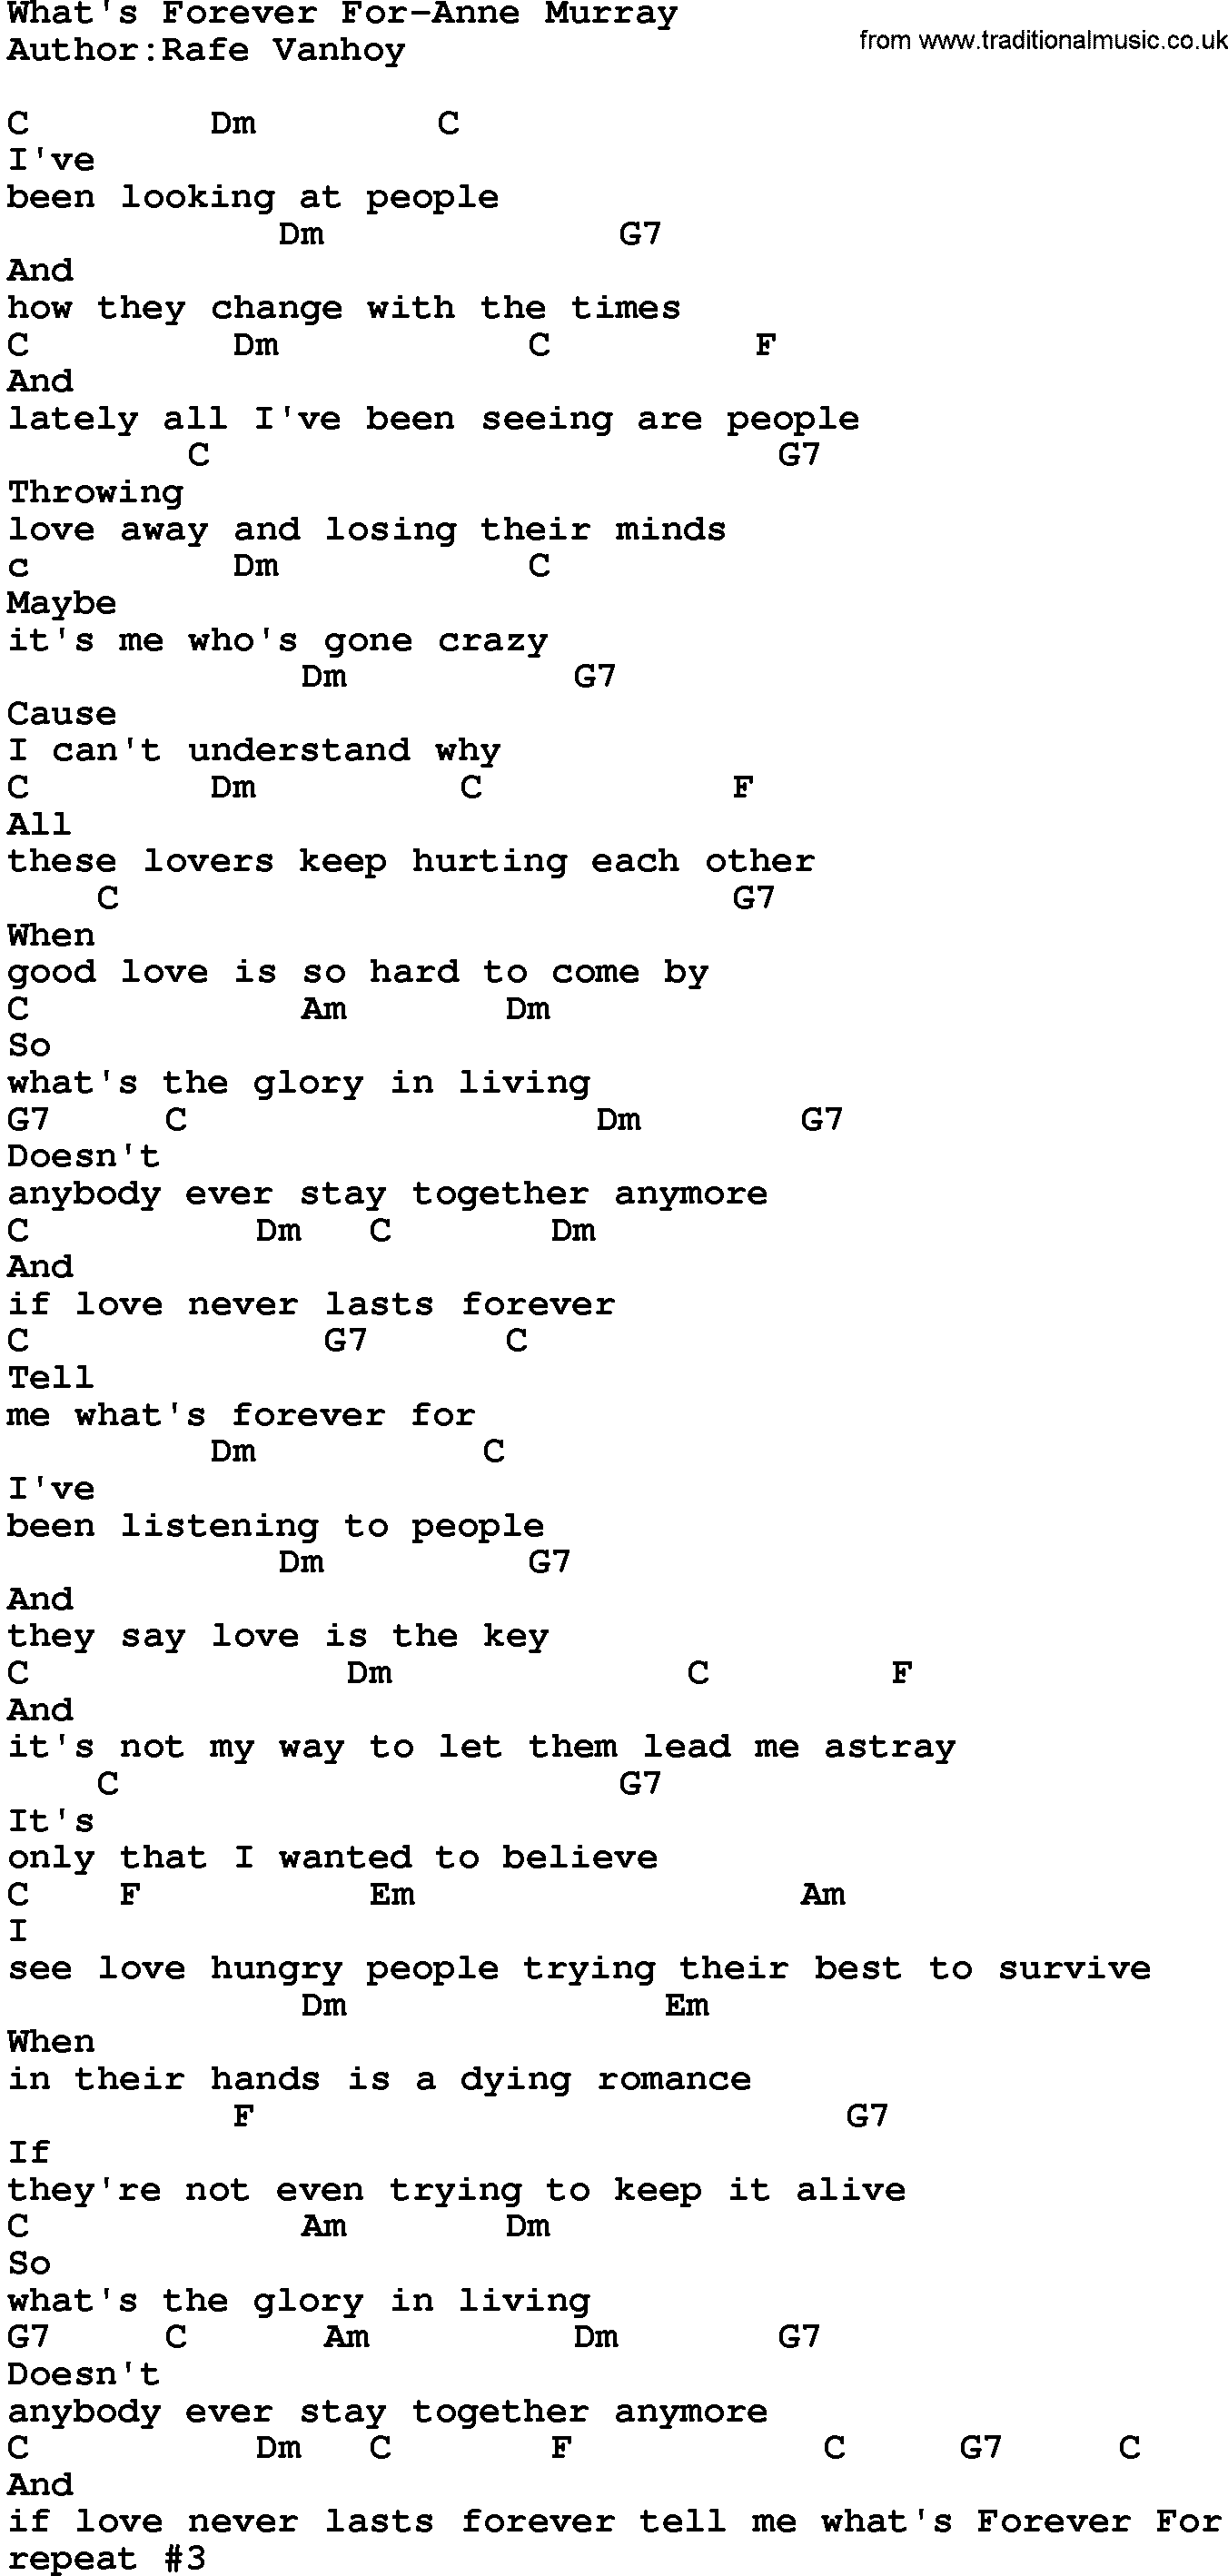 Country music song: What's Forever For-Anne Murray lyrics and chords